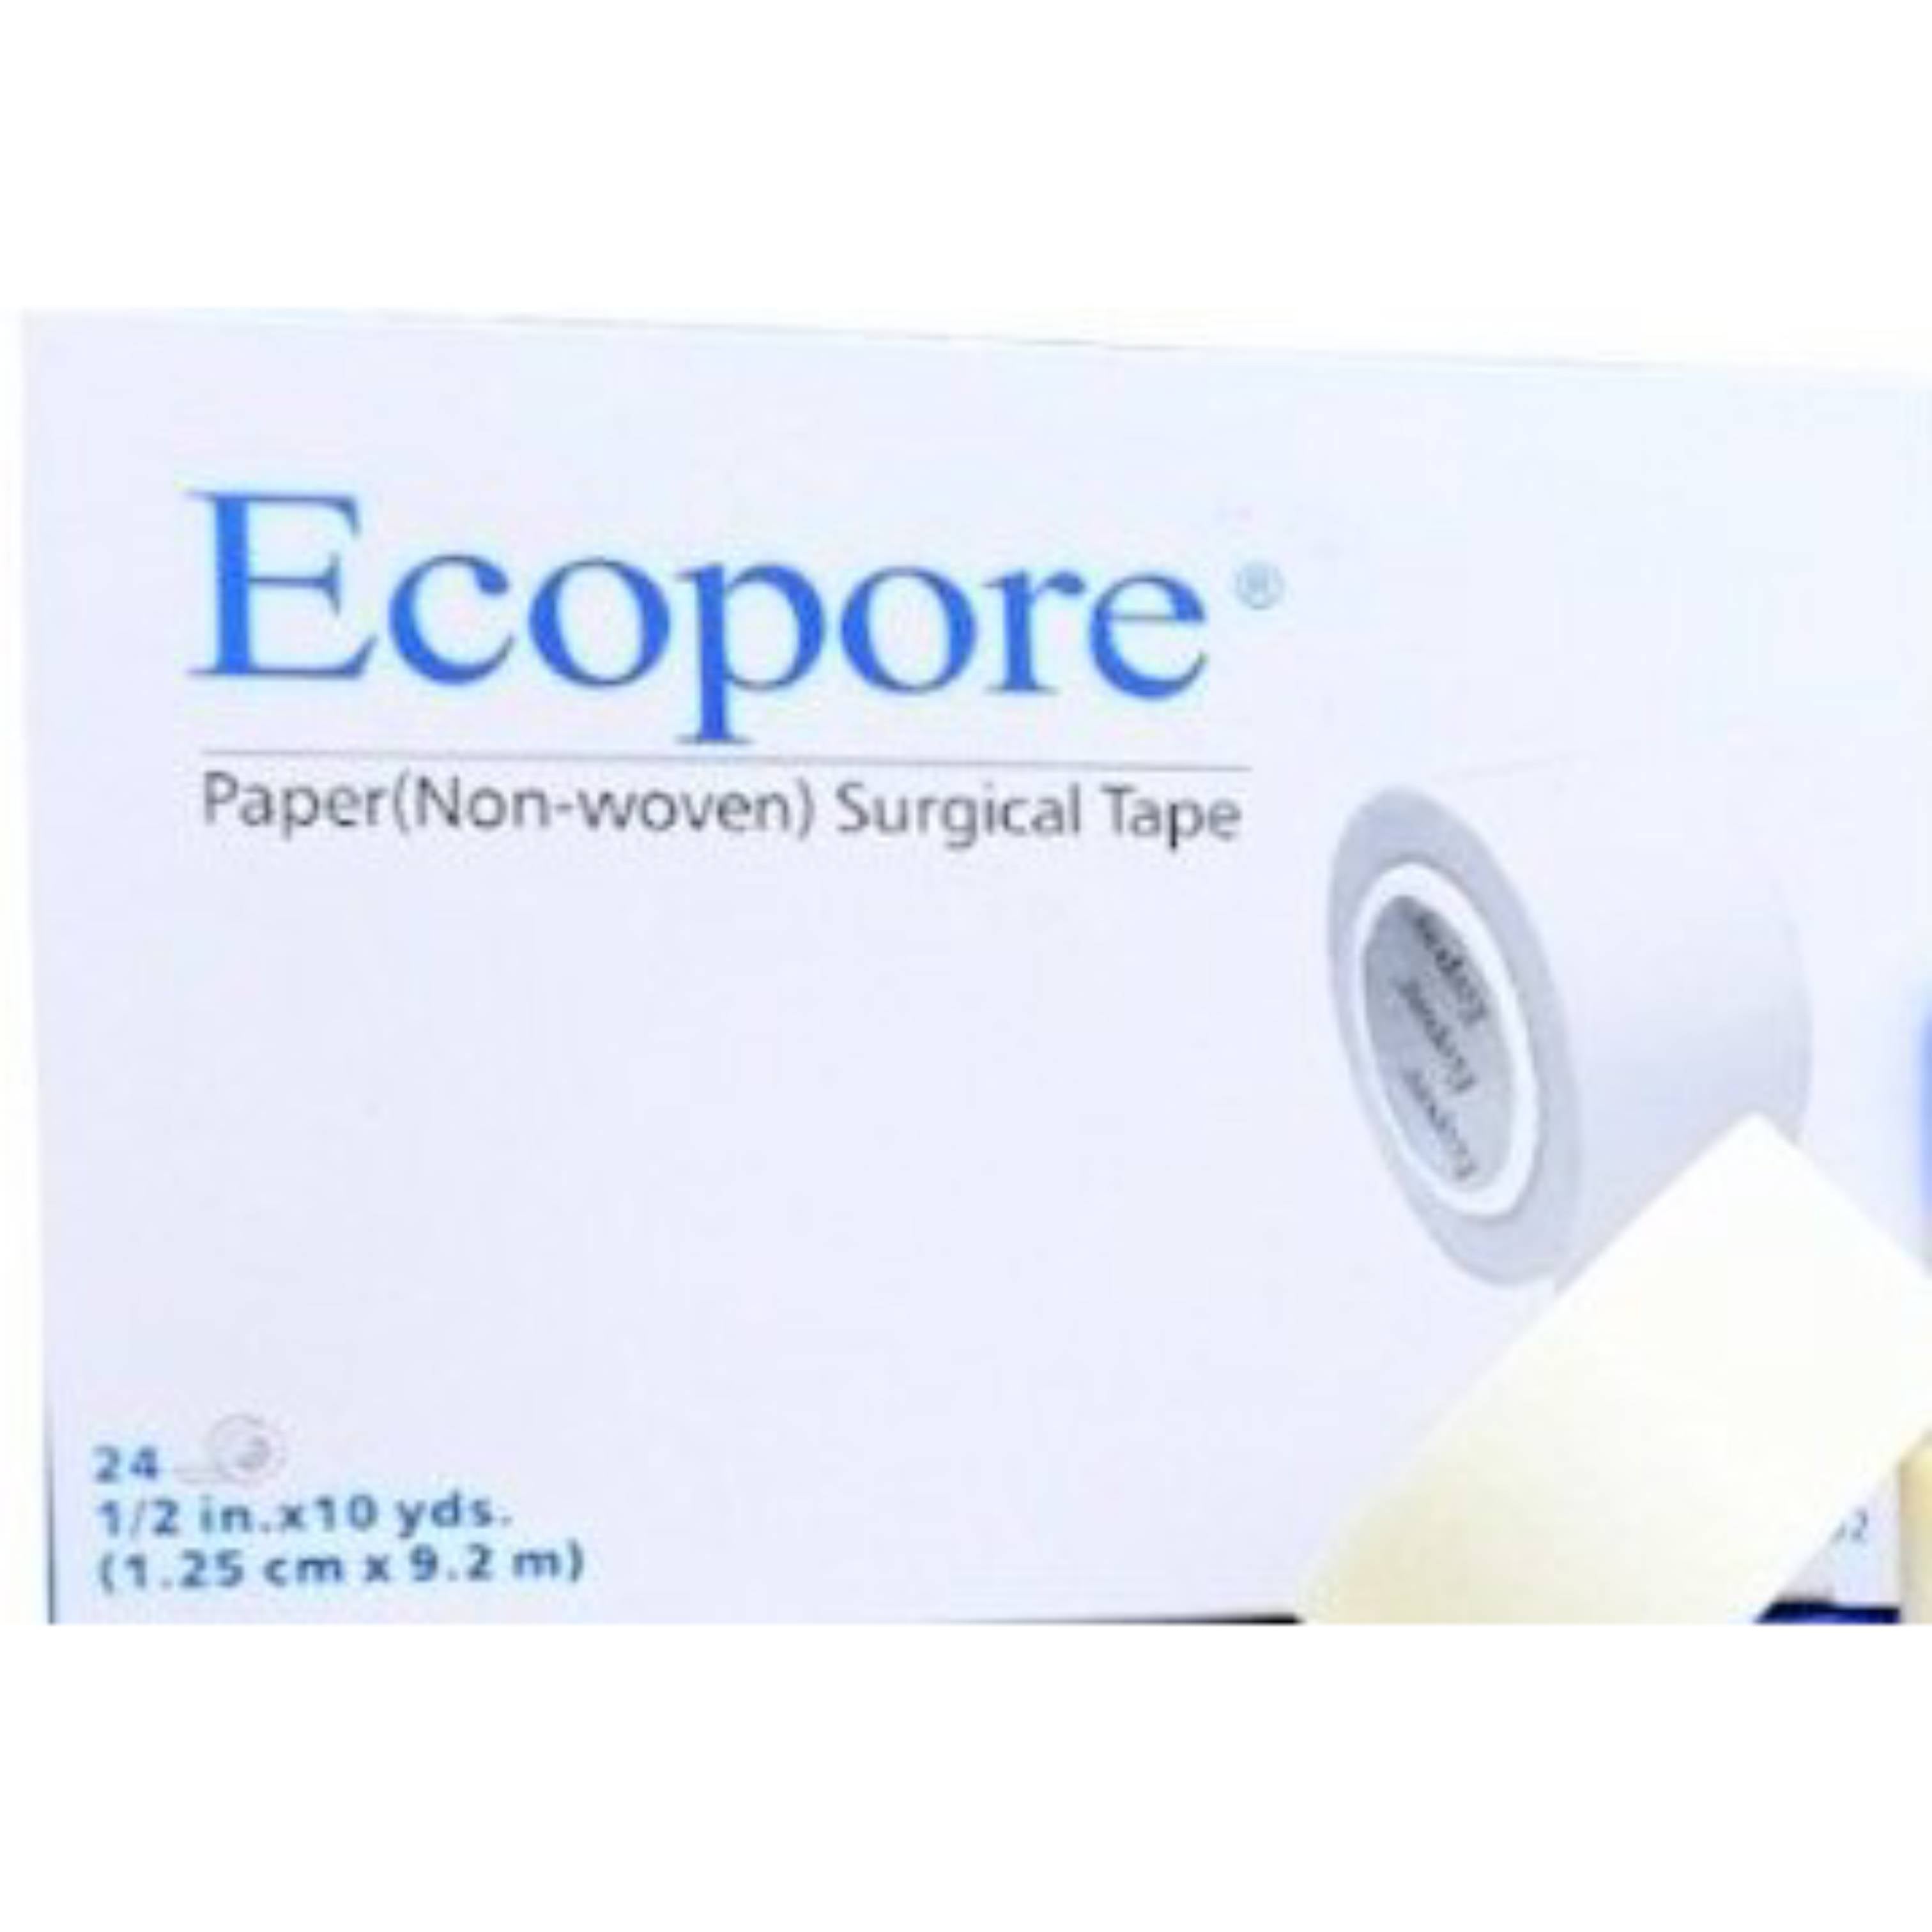 Ecopore Non Woven Surgical Tape Without Dispenser 1/2in x 10 yds - DoctorOnCall Online Pharmacy